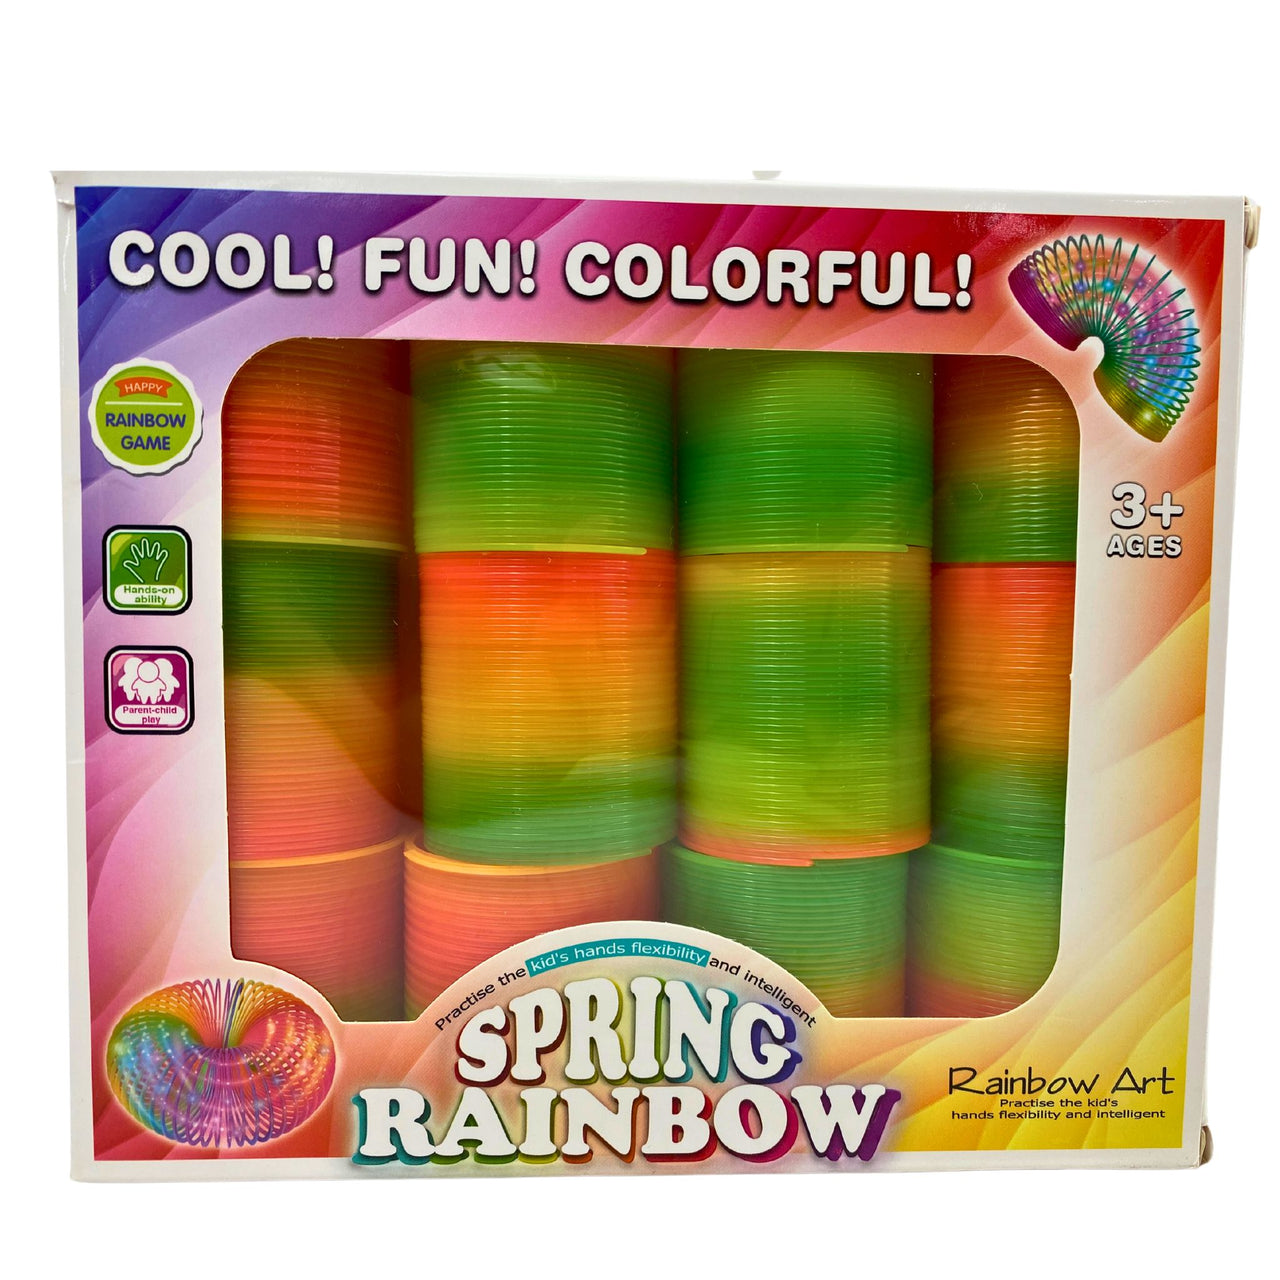 Spring Rainbow Rainbow Art Practise the Kid's hands flexibility & intelligance Ages 3+